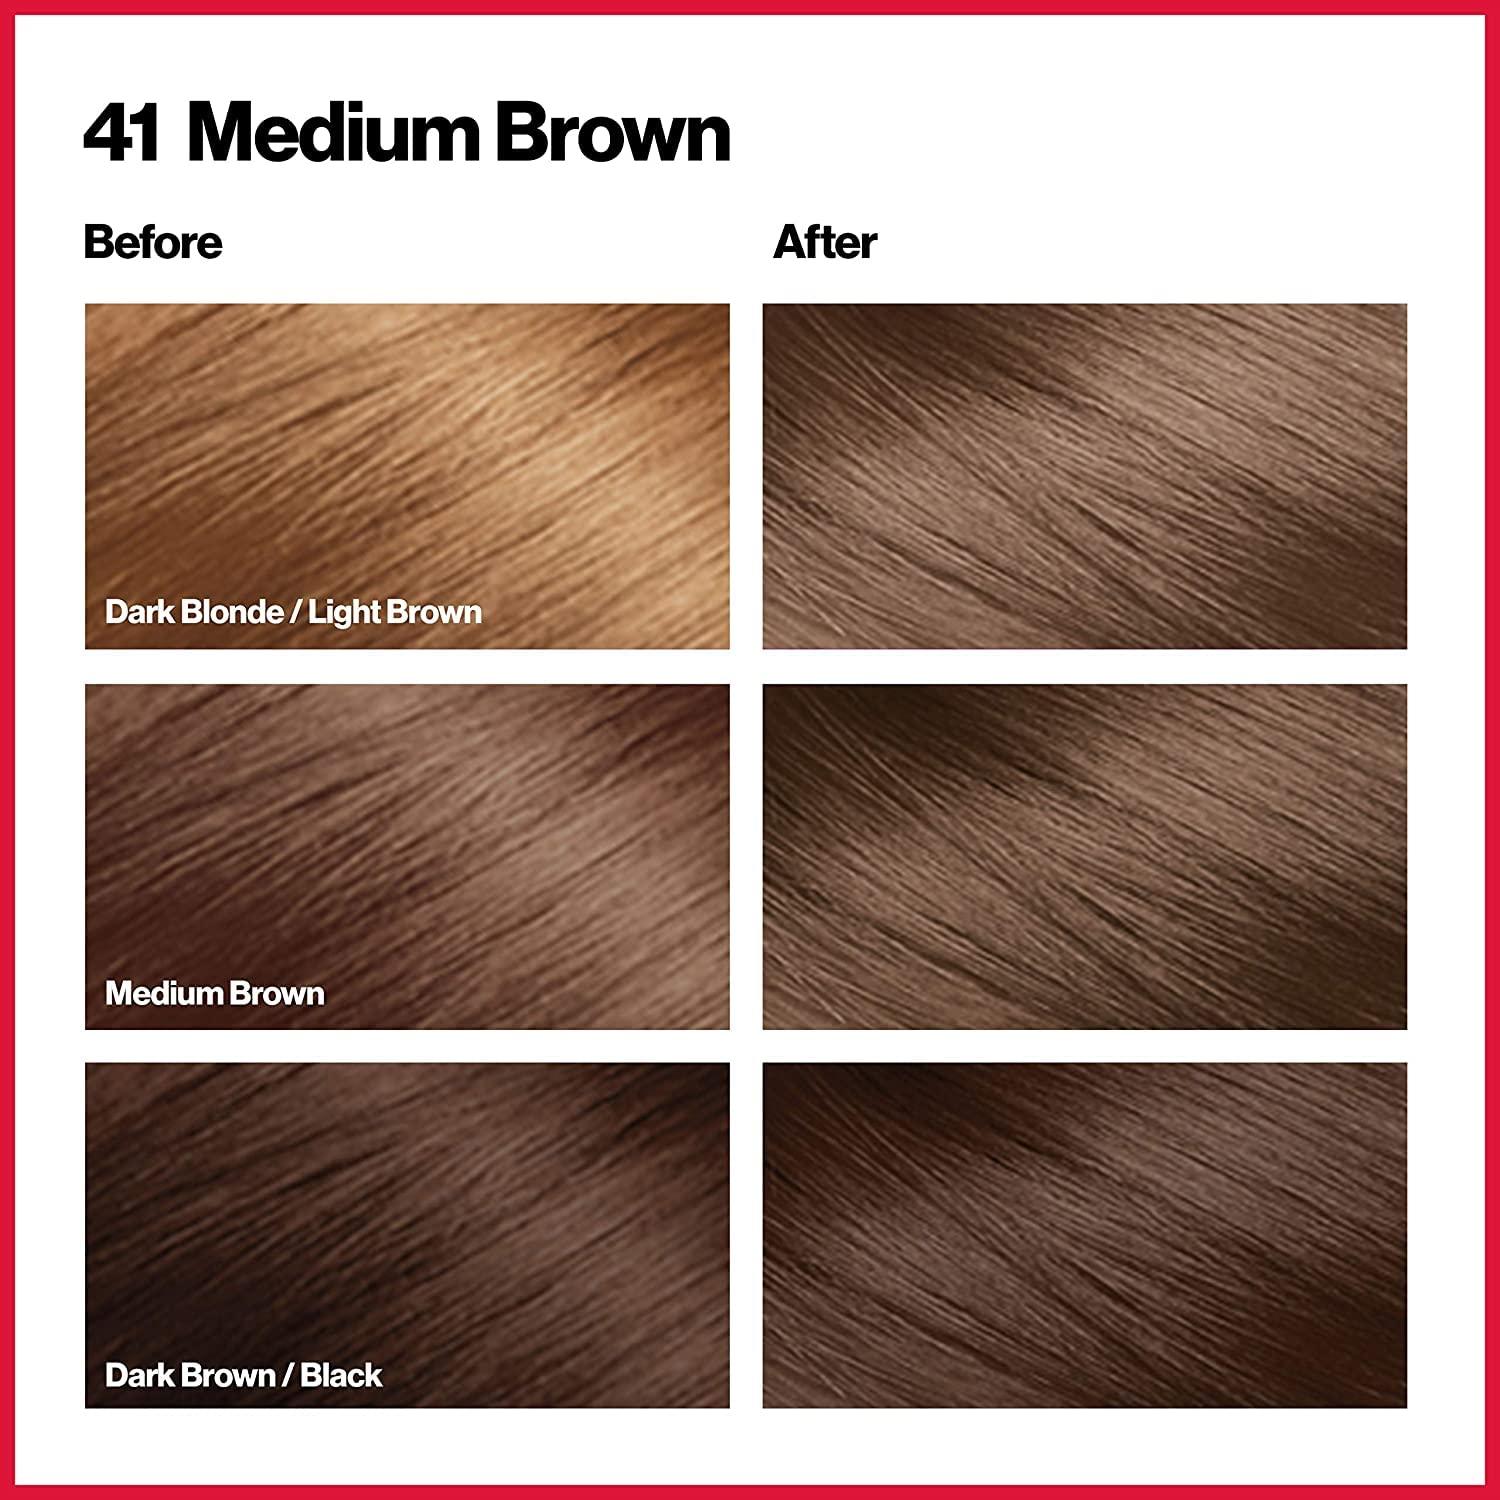 Permanent Hair Color by Revlon, Permanent Hair Dye, Colorsilk with 100%  Gray Coverage, Ammonia-Free, Keratin and Amino Acids, 41 Medium Brown,   Oz (Pack of 3) 41 Medium Brown 1 Count (Pack of 3) OLD VERSION